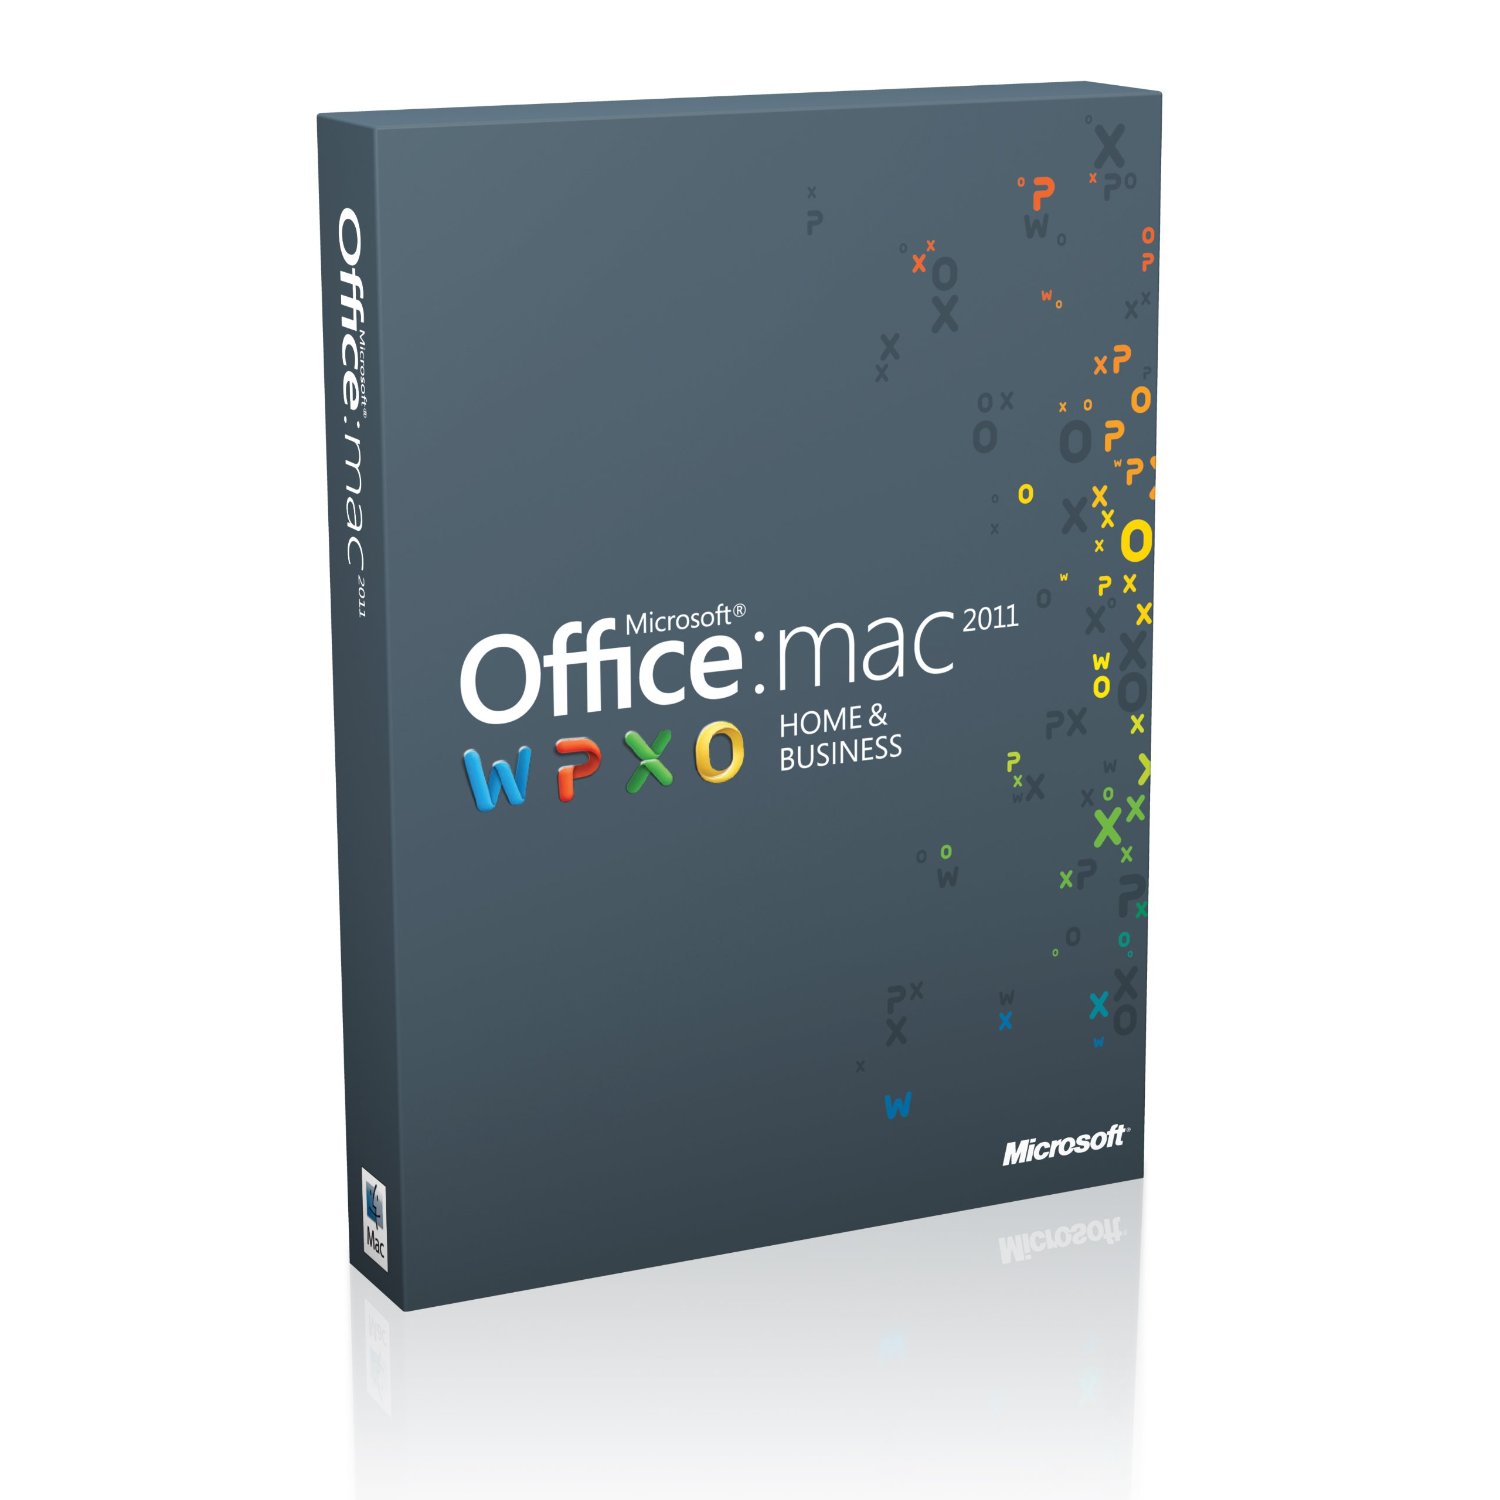 Office for mac 2011 home and business technet professional downloads